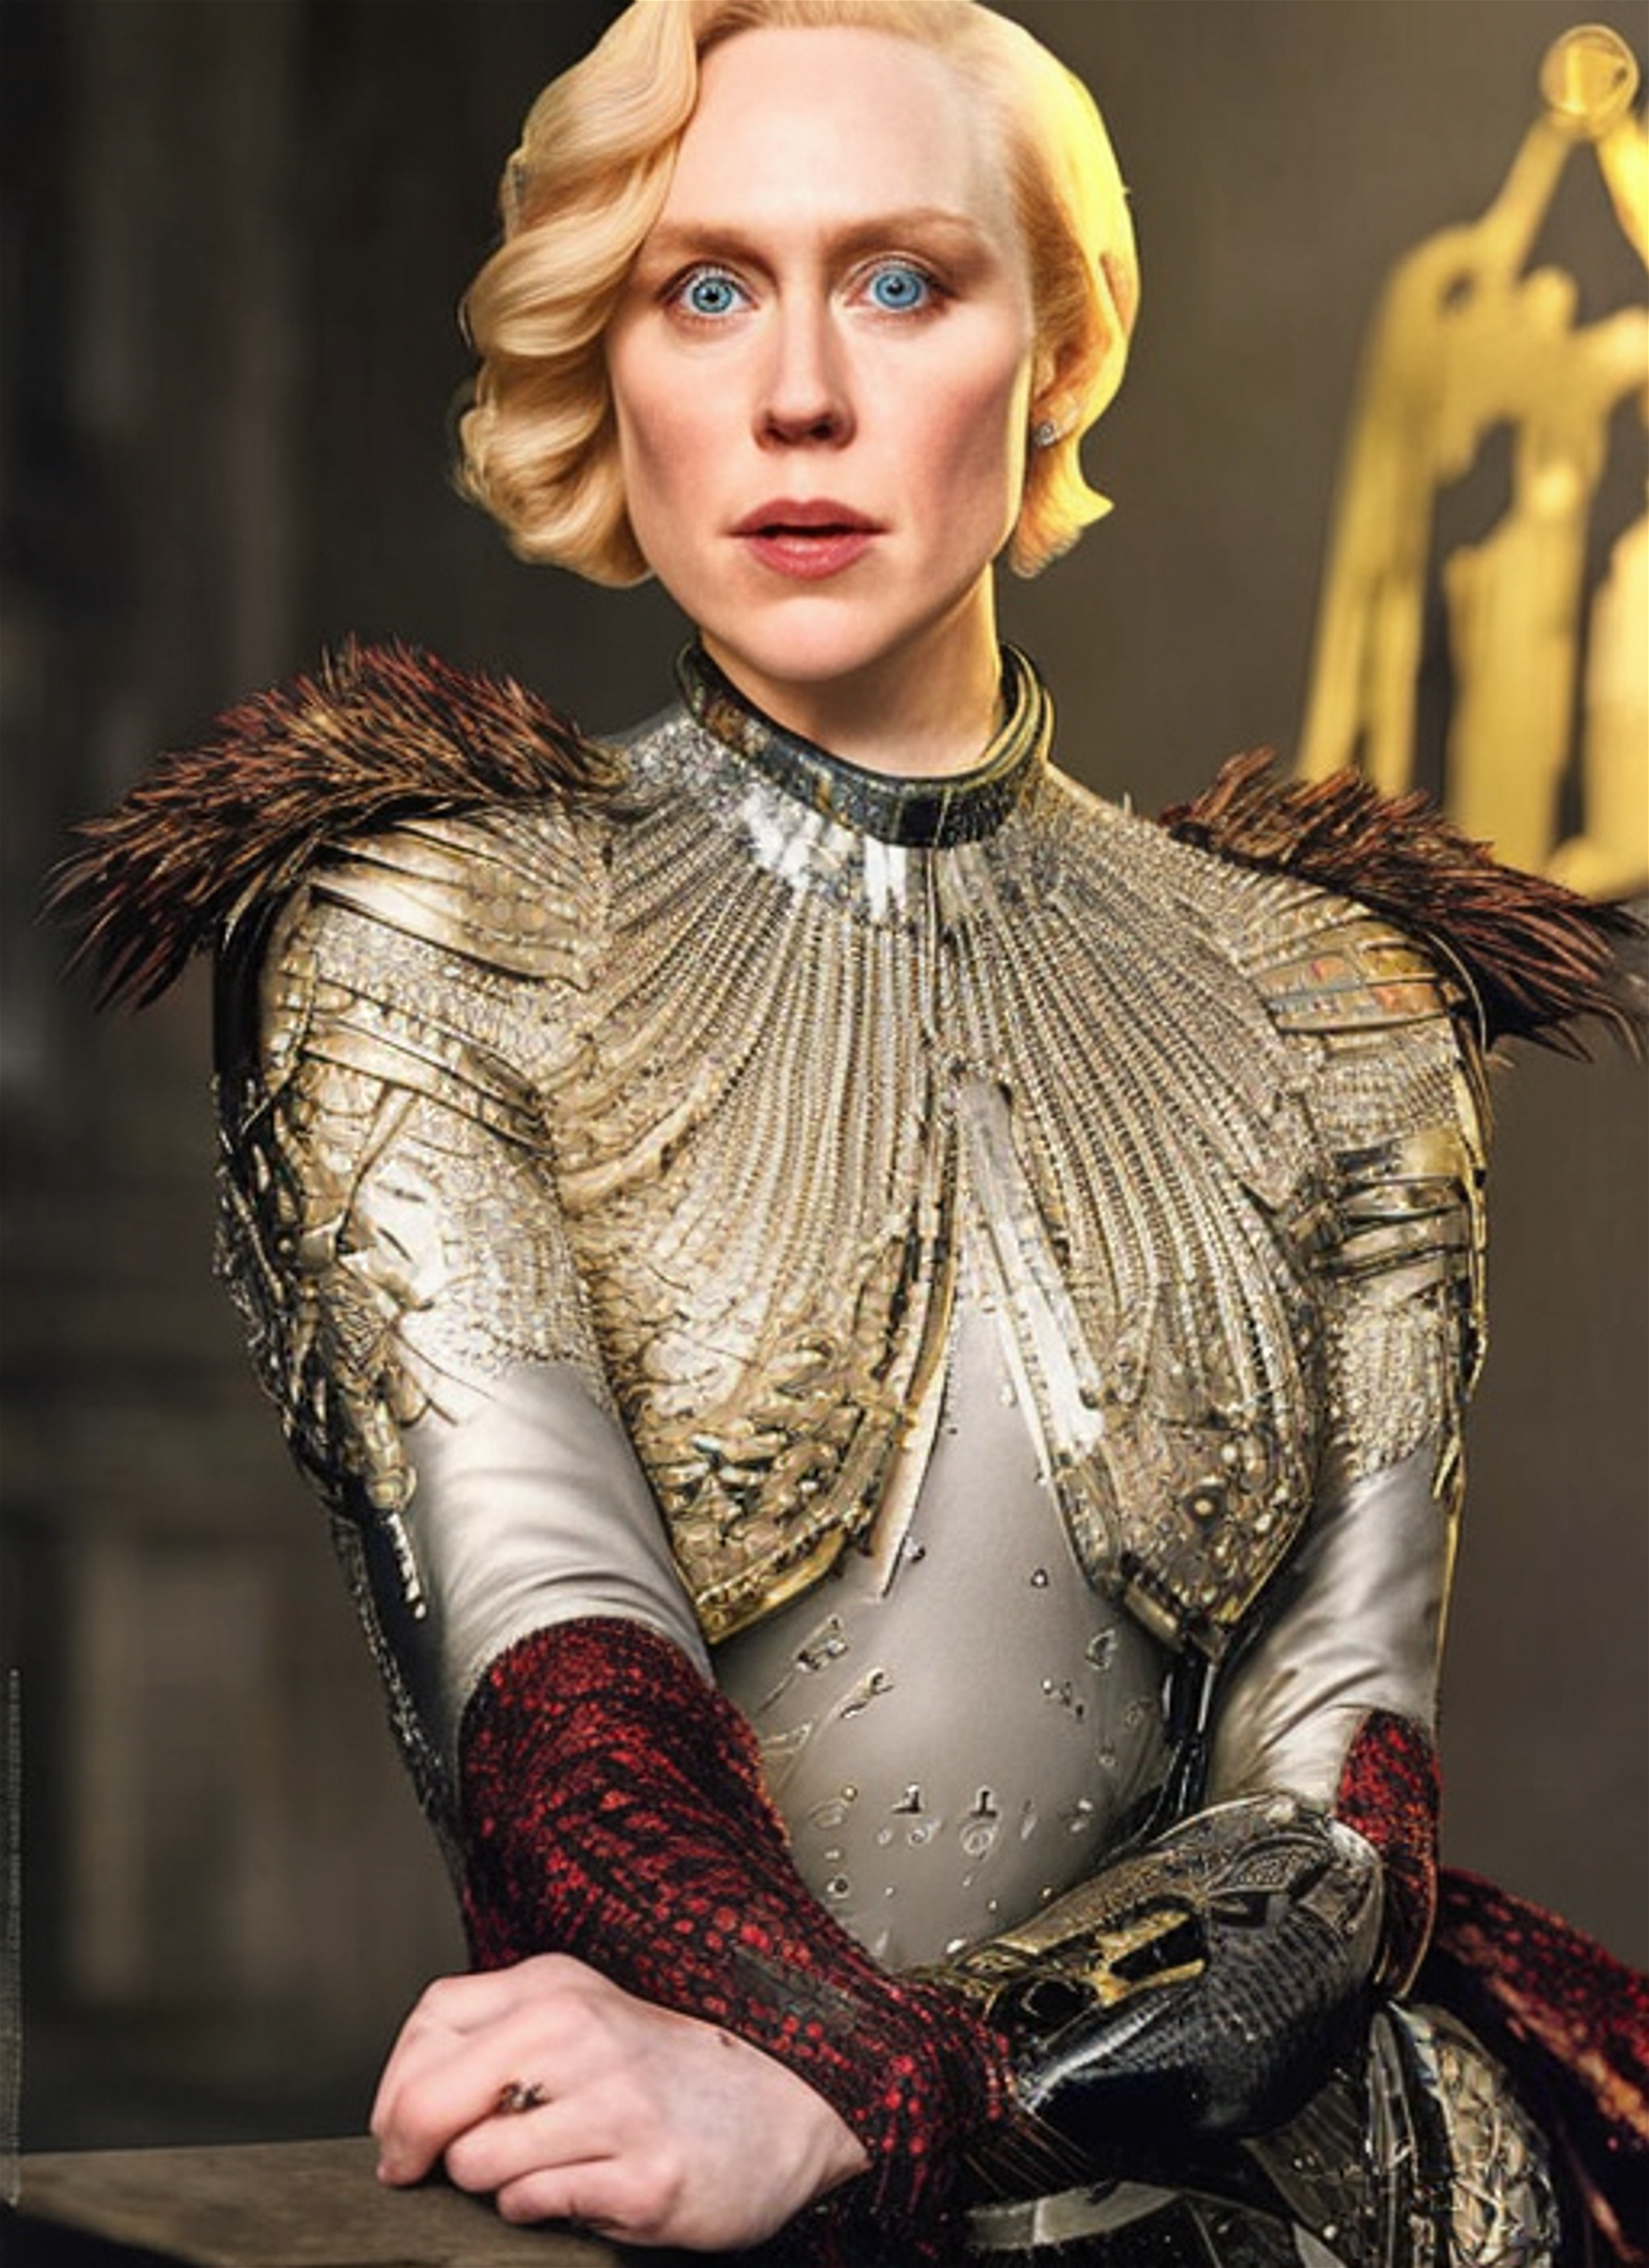 A stunning, highly detailed and photorealistic portrait of Gwendoline Christie, with a dramatic and intense expression, inspired by the works of Alex Ross and J. Scott Campbell, featuring bold colors and sharp lines